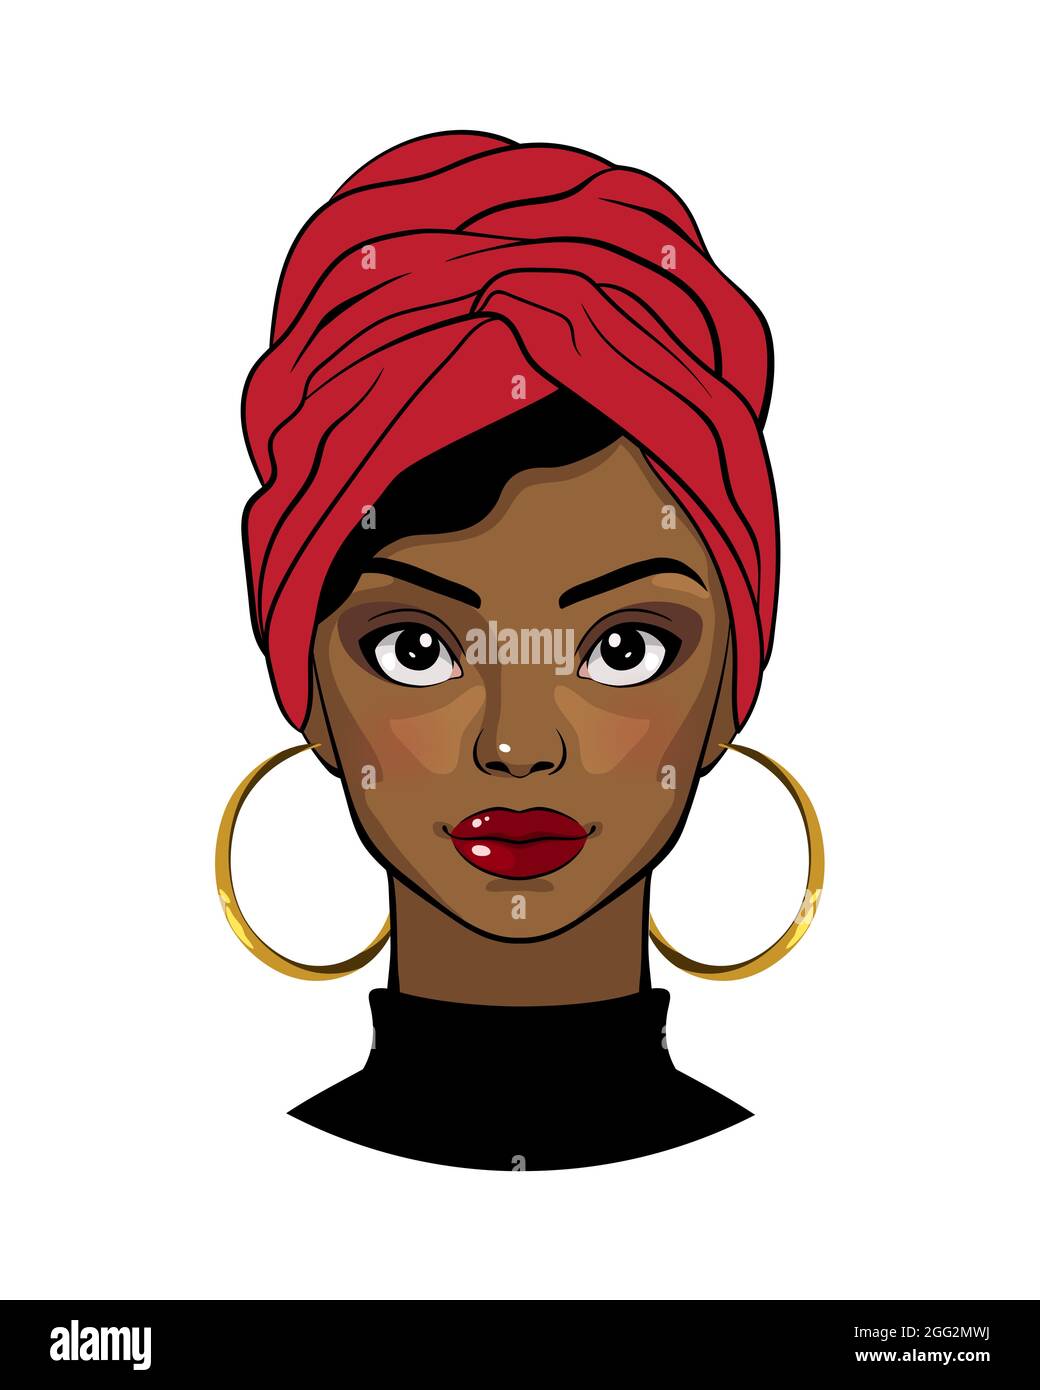 Beautiful black woman. Cartoon afro american girl wearing red head wrap and round earrings. Fashion Illustration on white background. Stock Vector